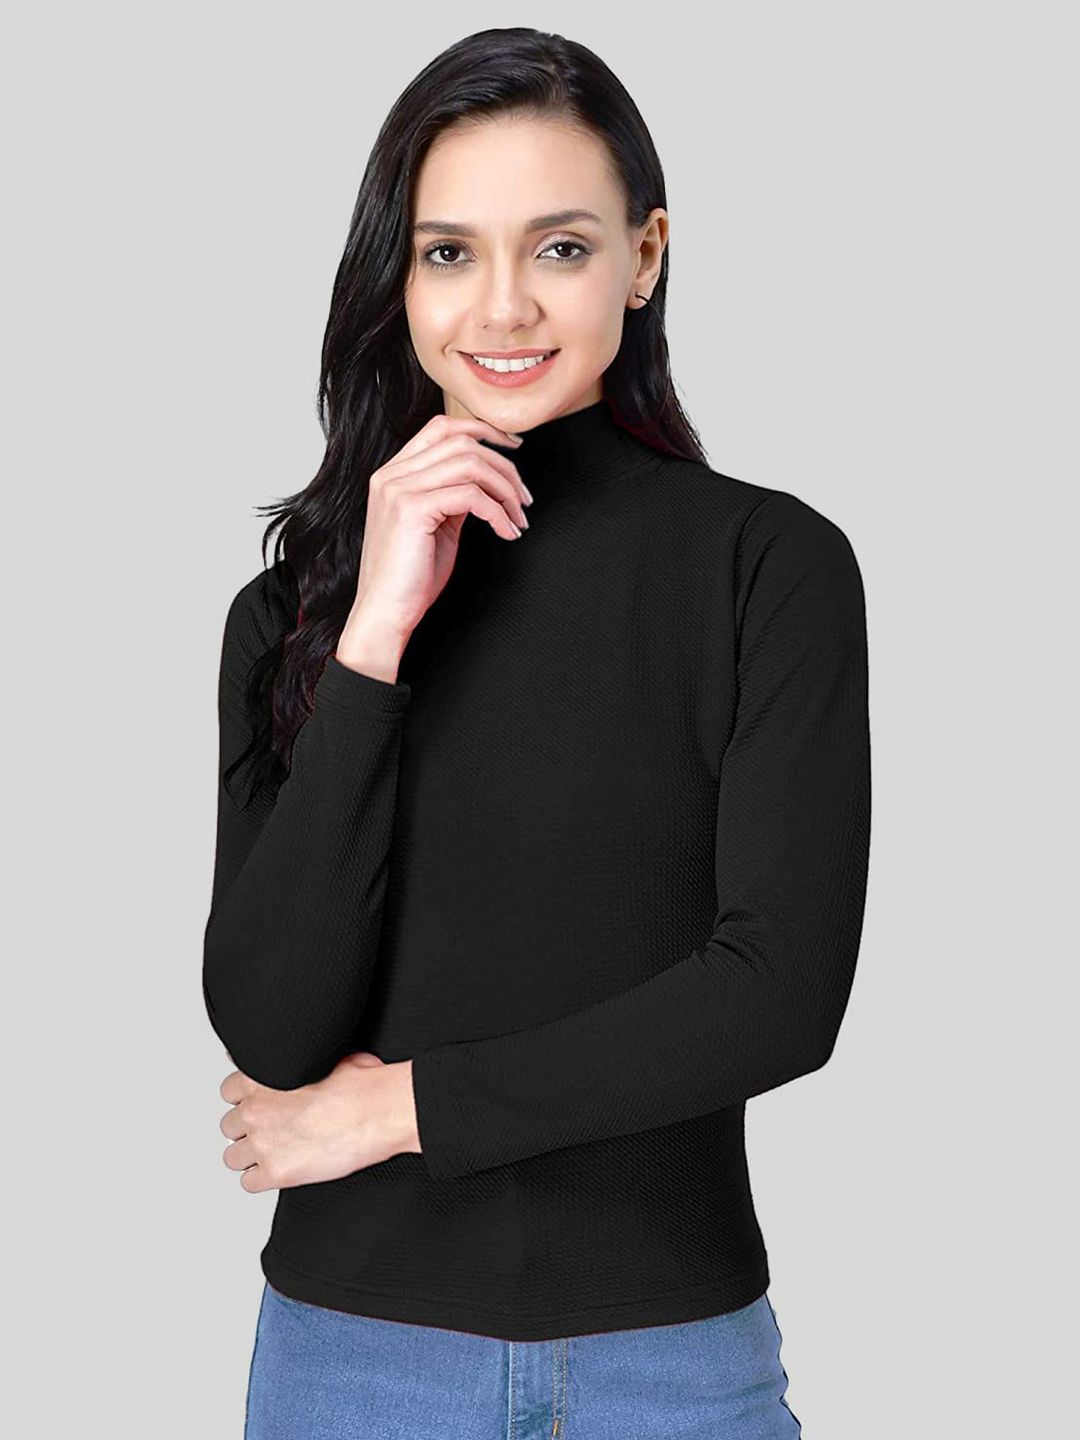 Womenster Black Crepe Shirt Style Top Price in India